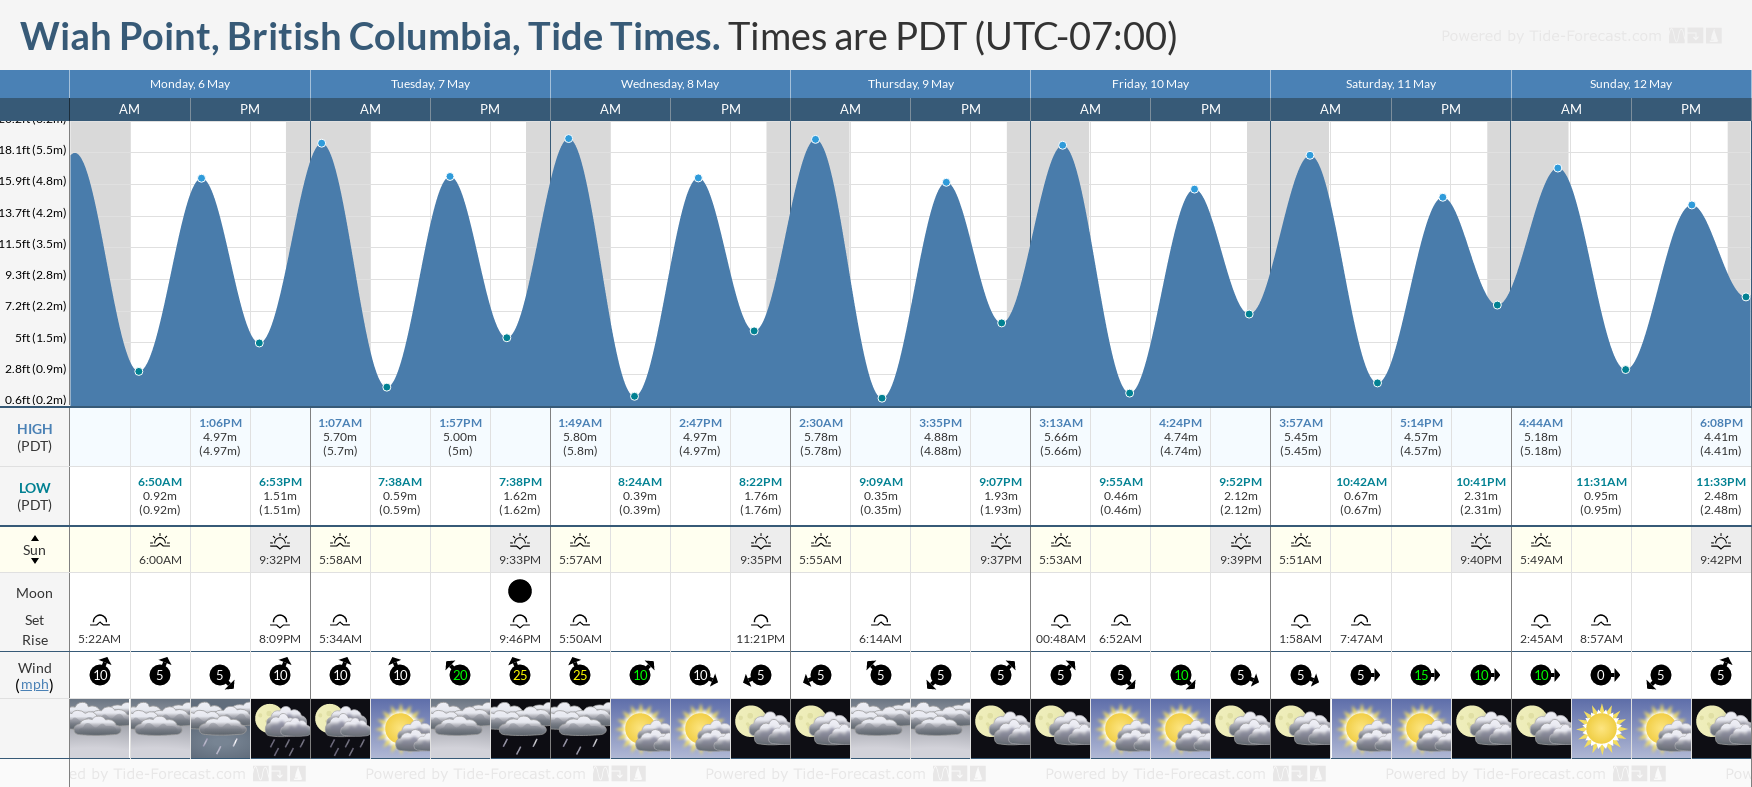 Wiah Point, British Columbia Tide Chart including high and low tide tide times for the next 7 days